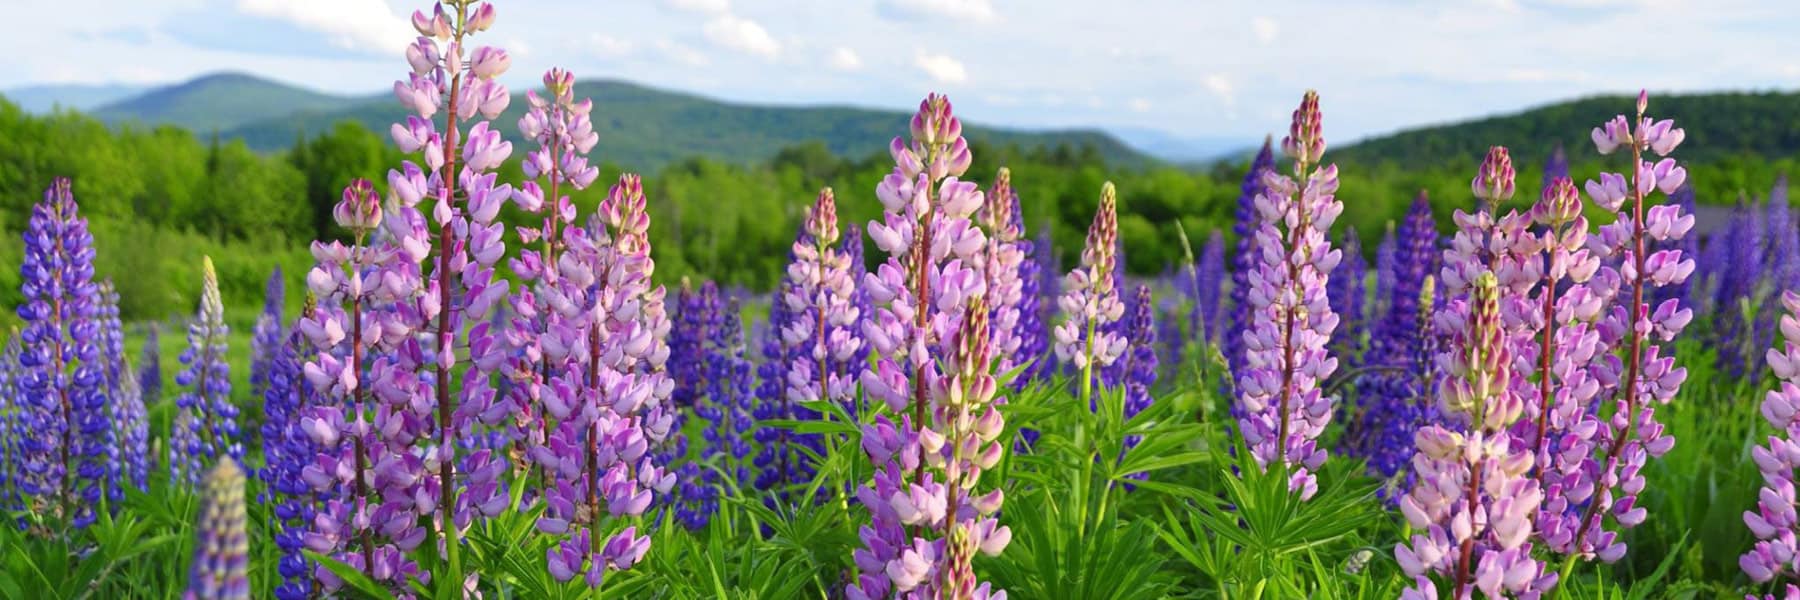 lupins in a field